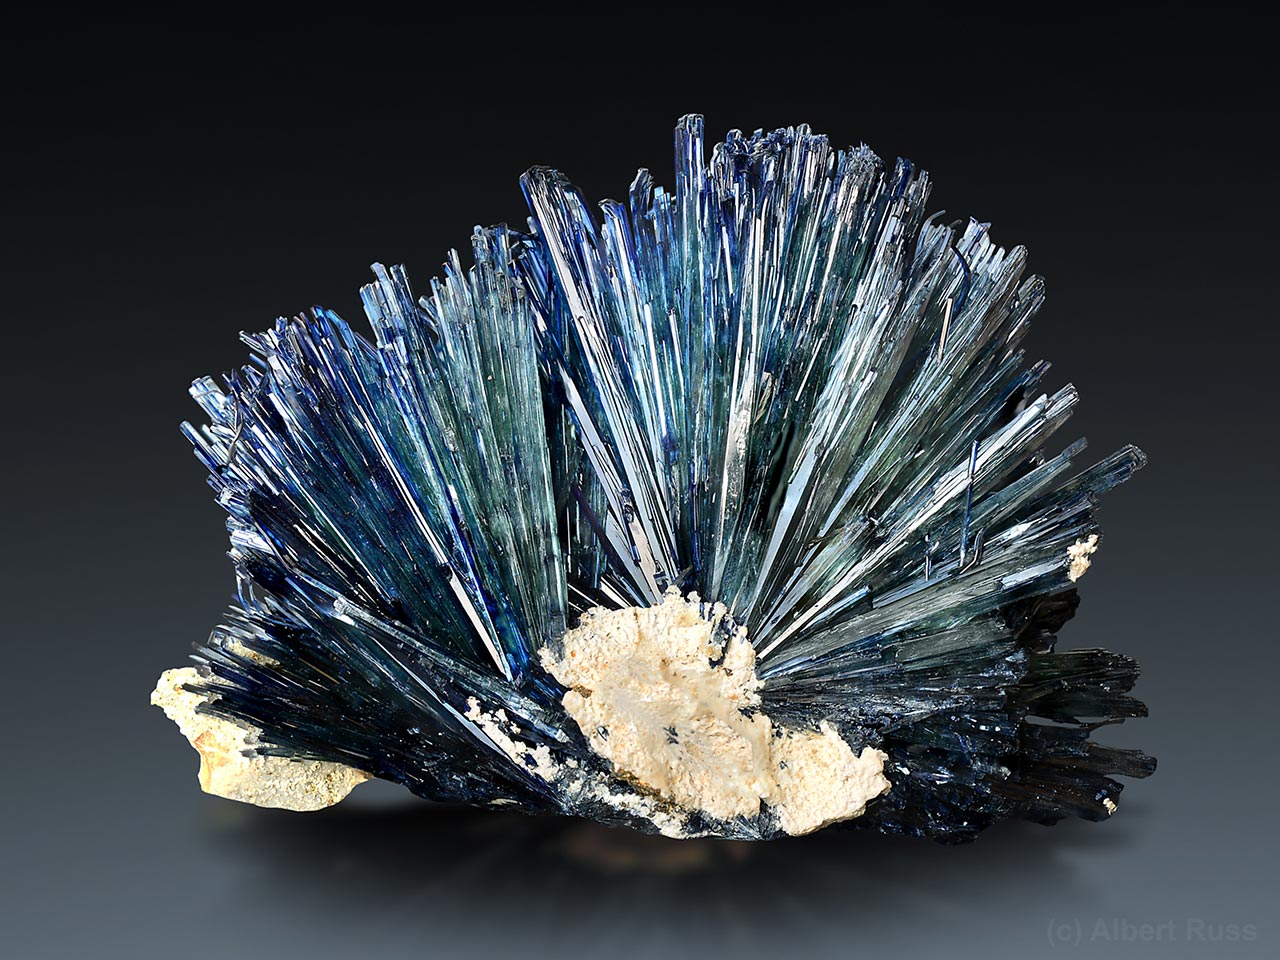 Cluster of thin blue-green vivianite crystals from Bolivia